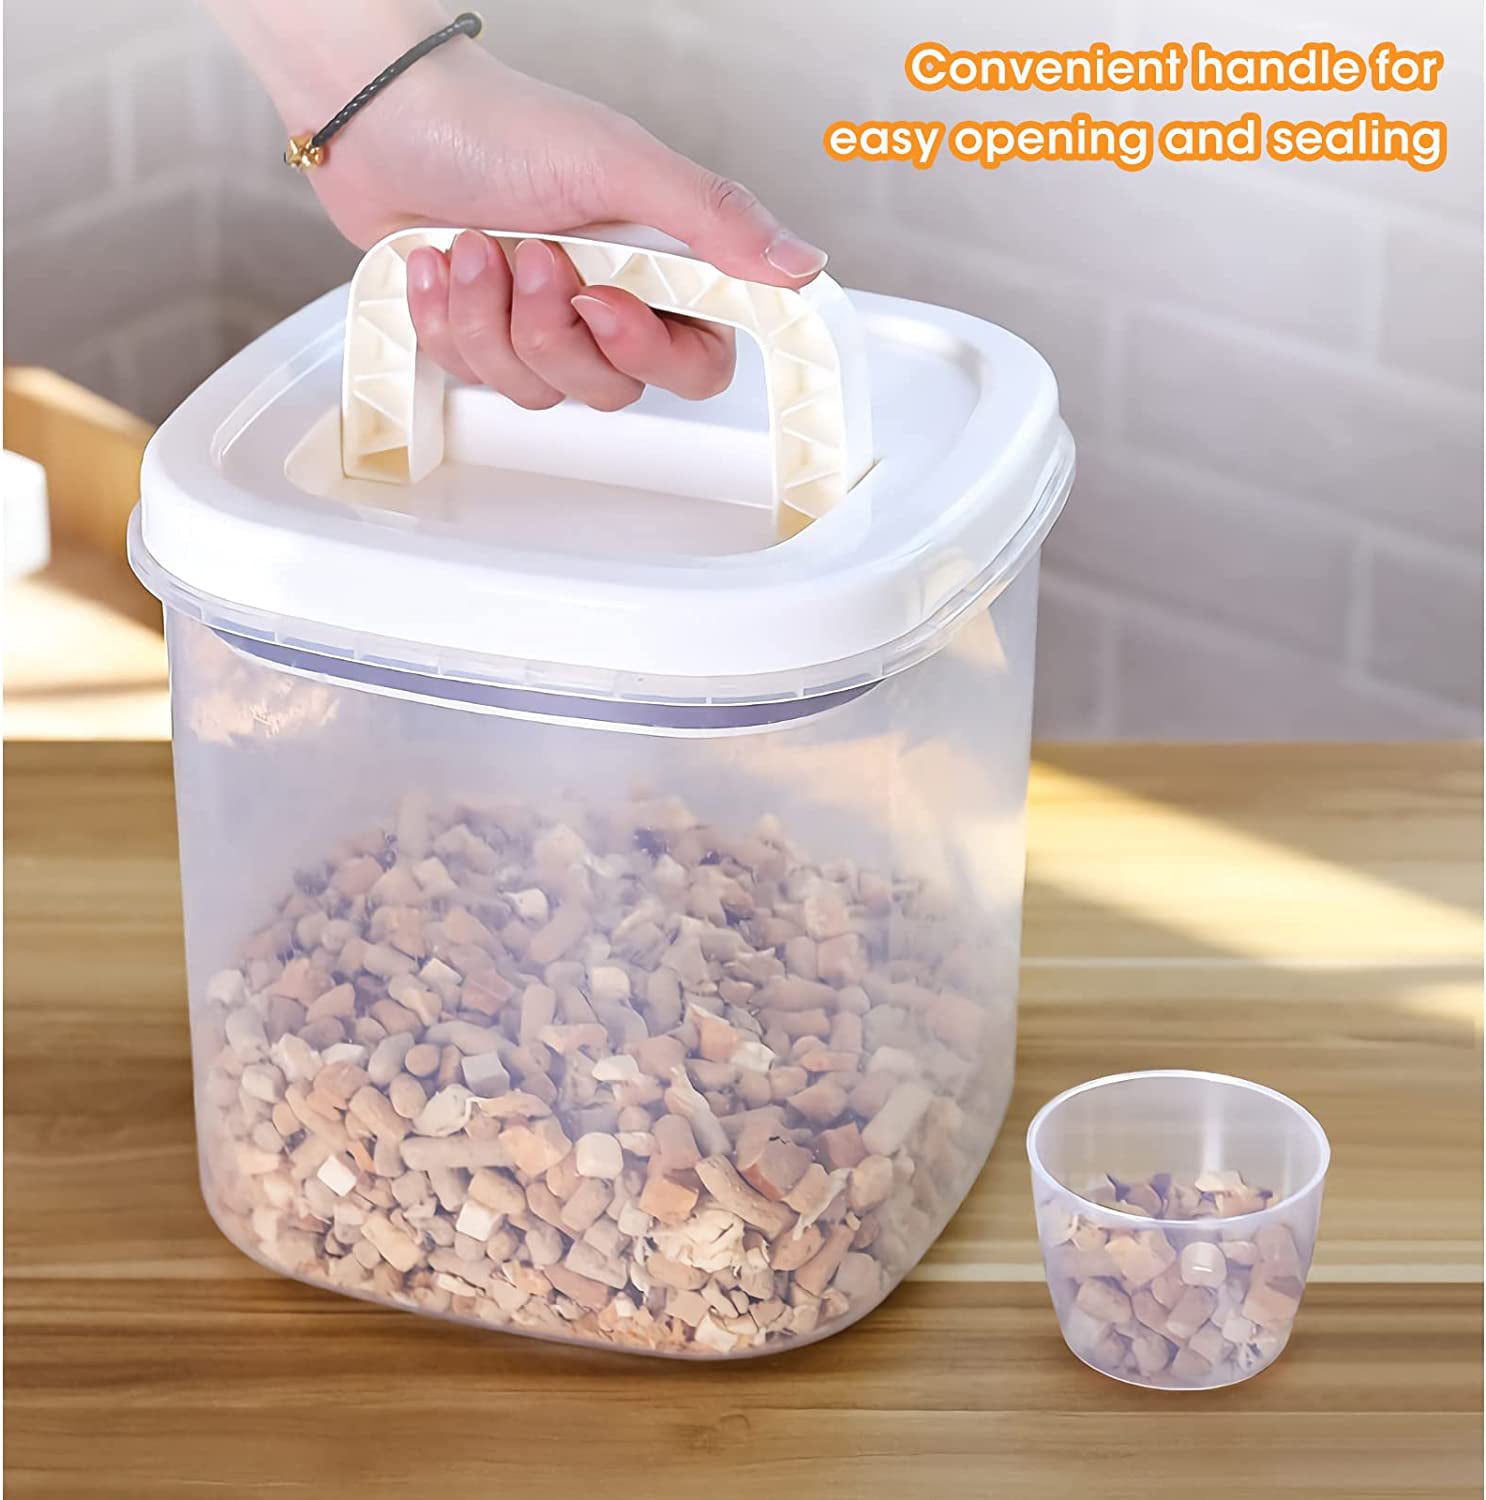 Flour Storage Containers That Fit 5 Pounds of Flour » the